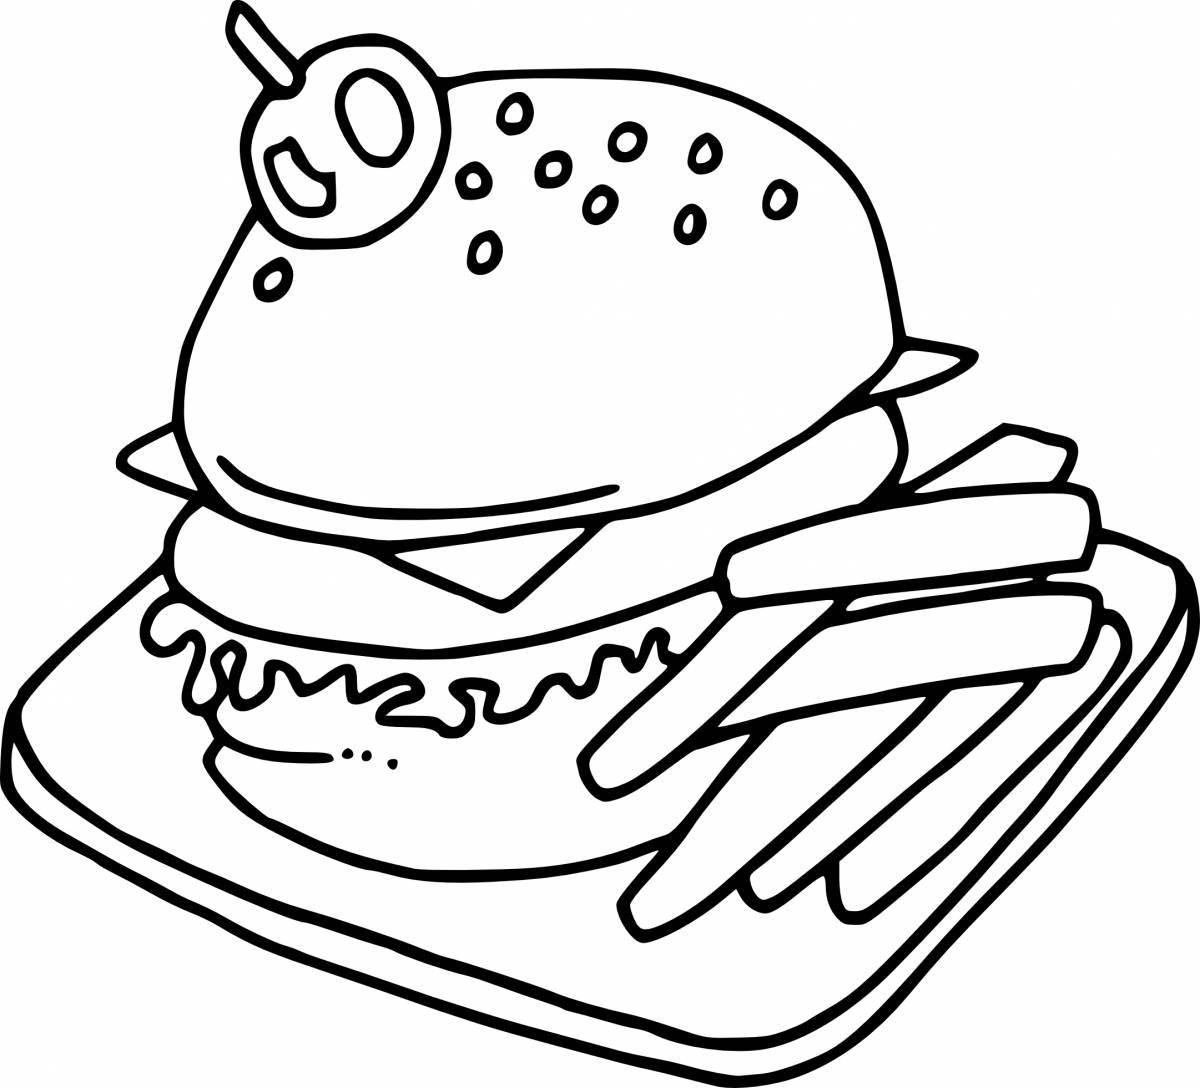 Tempting duck food coloring page